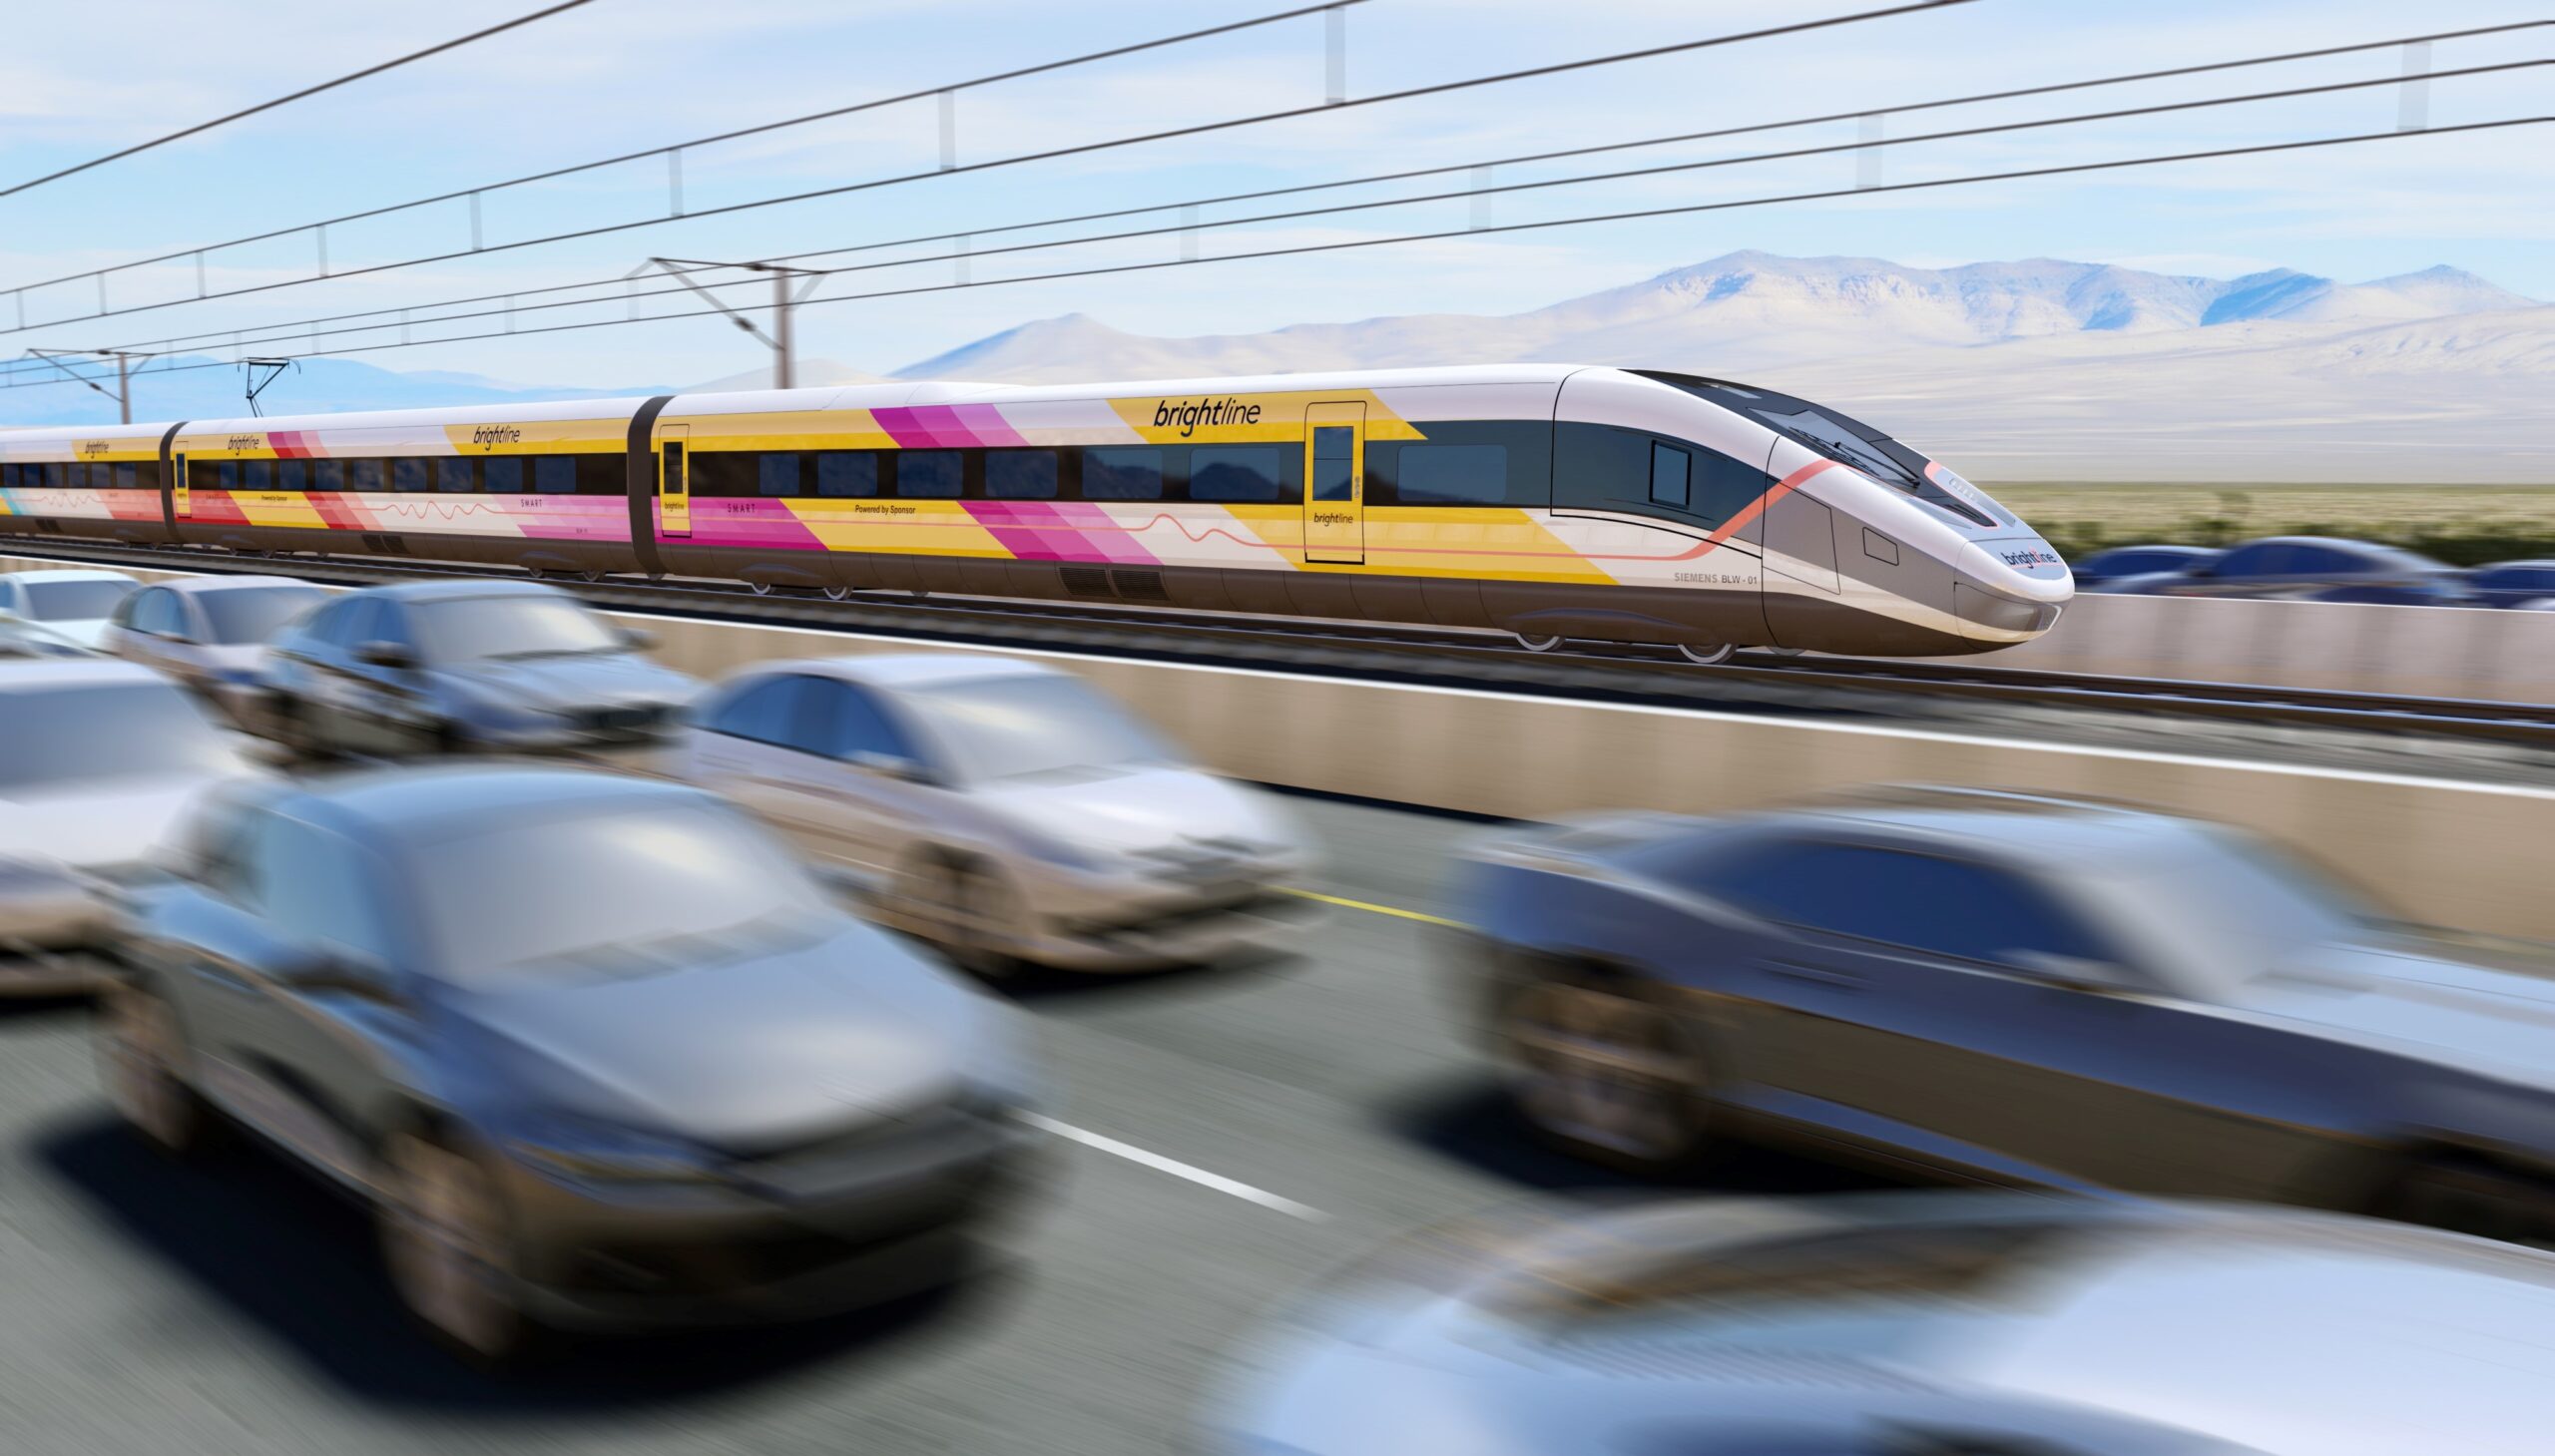 Caltrans, CDFW and Brightline West have agreed to design and construct three wildlife overcrossings across I-15 and the future Brightline West high-speed rail system.